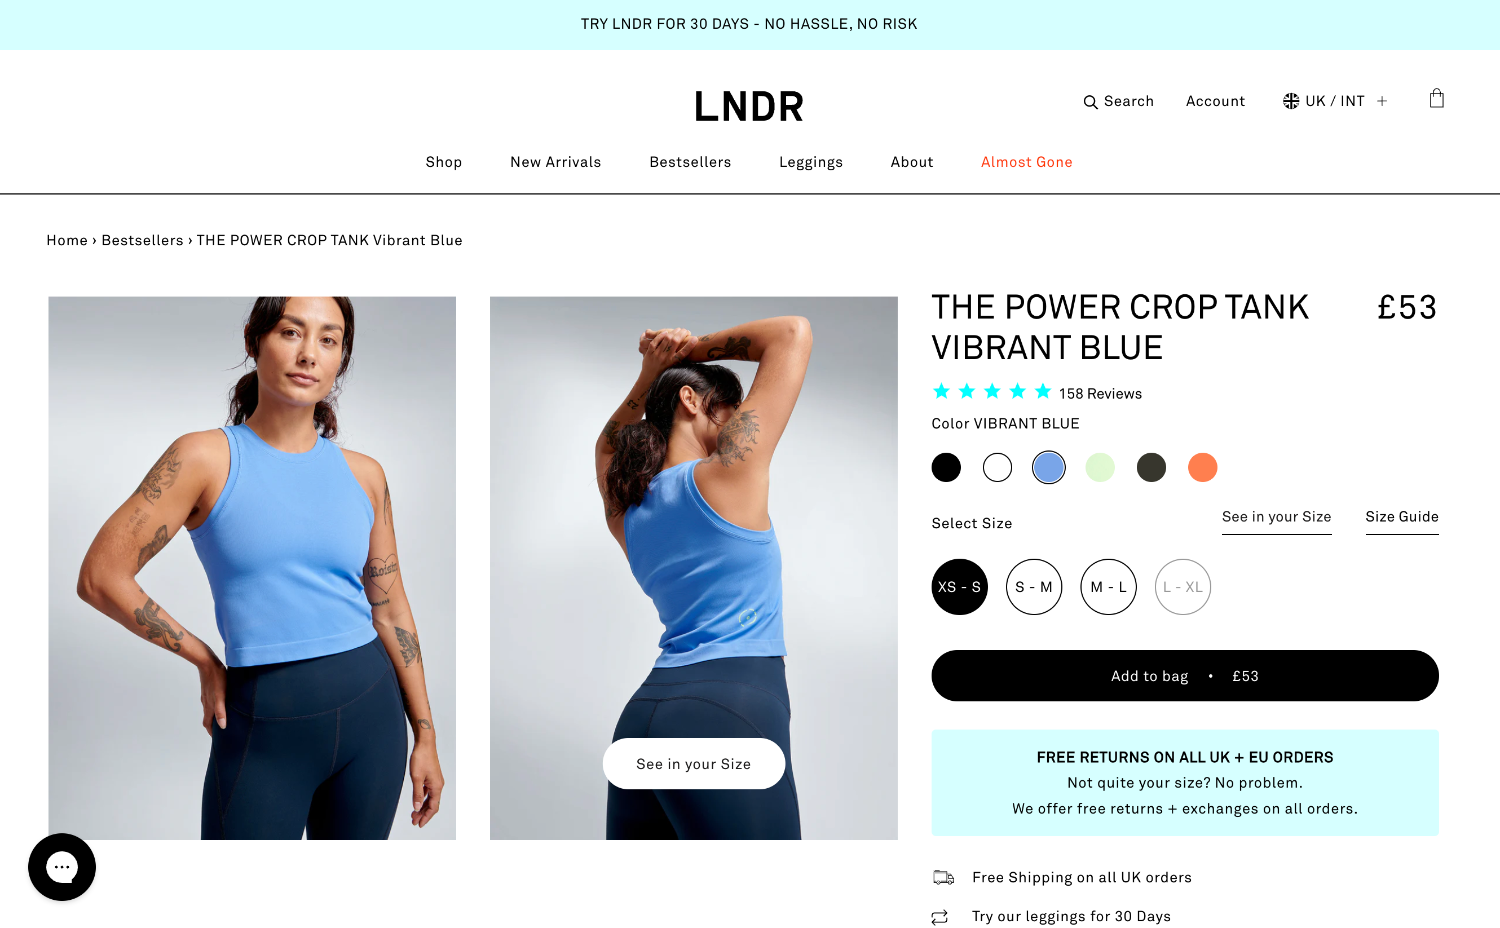 A product page for a product on the brand LNDR's ecommerce website